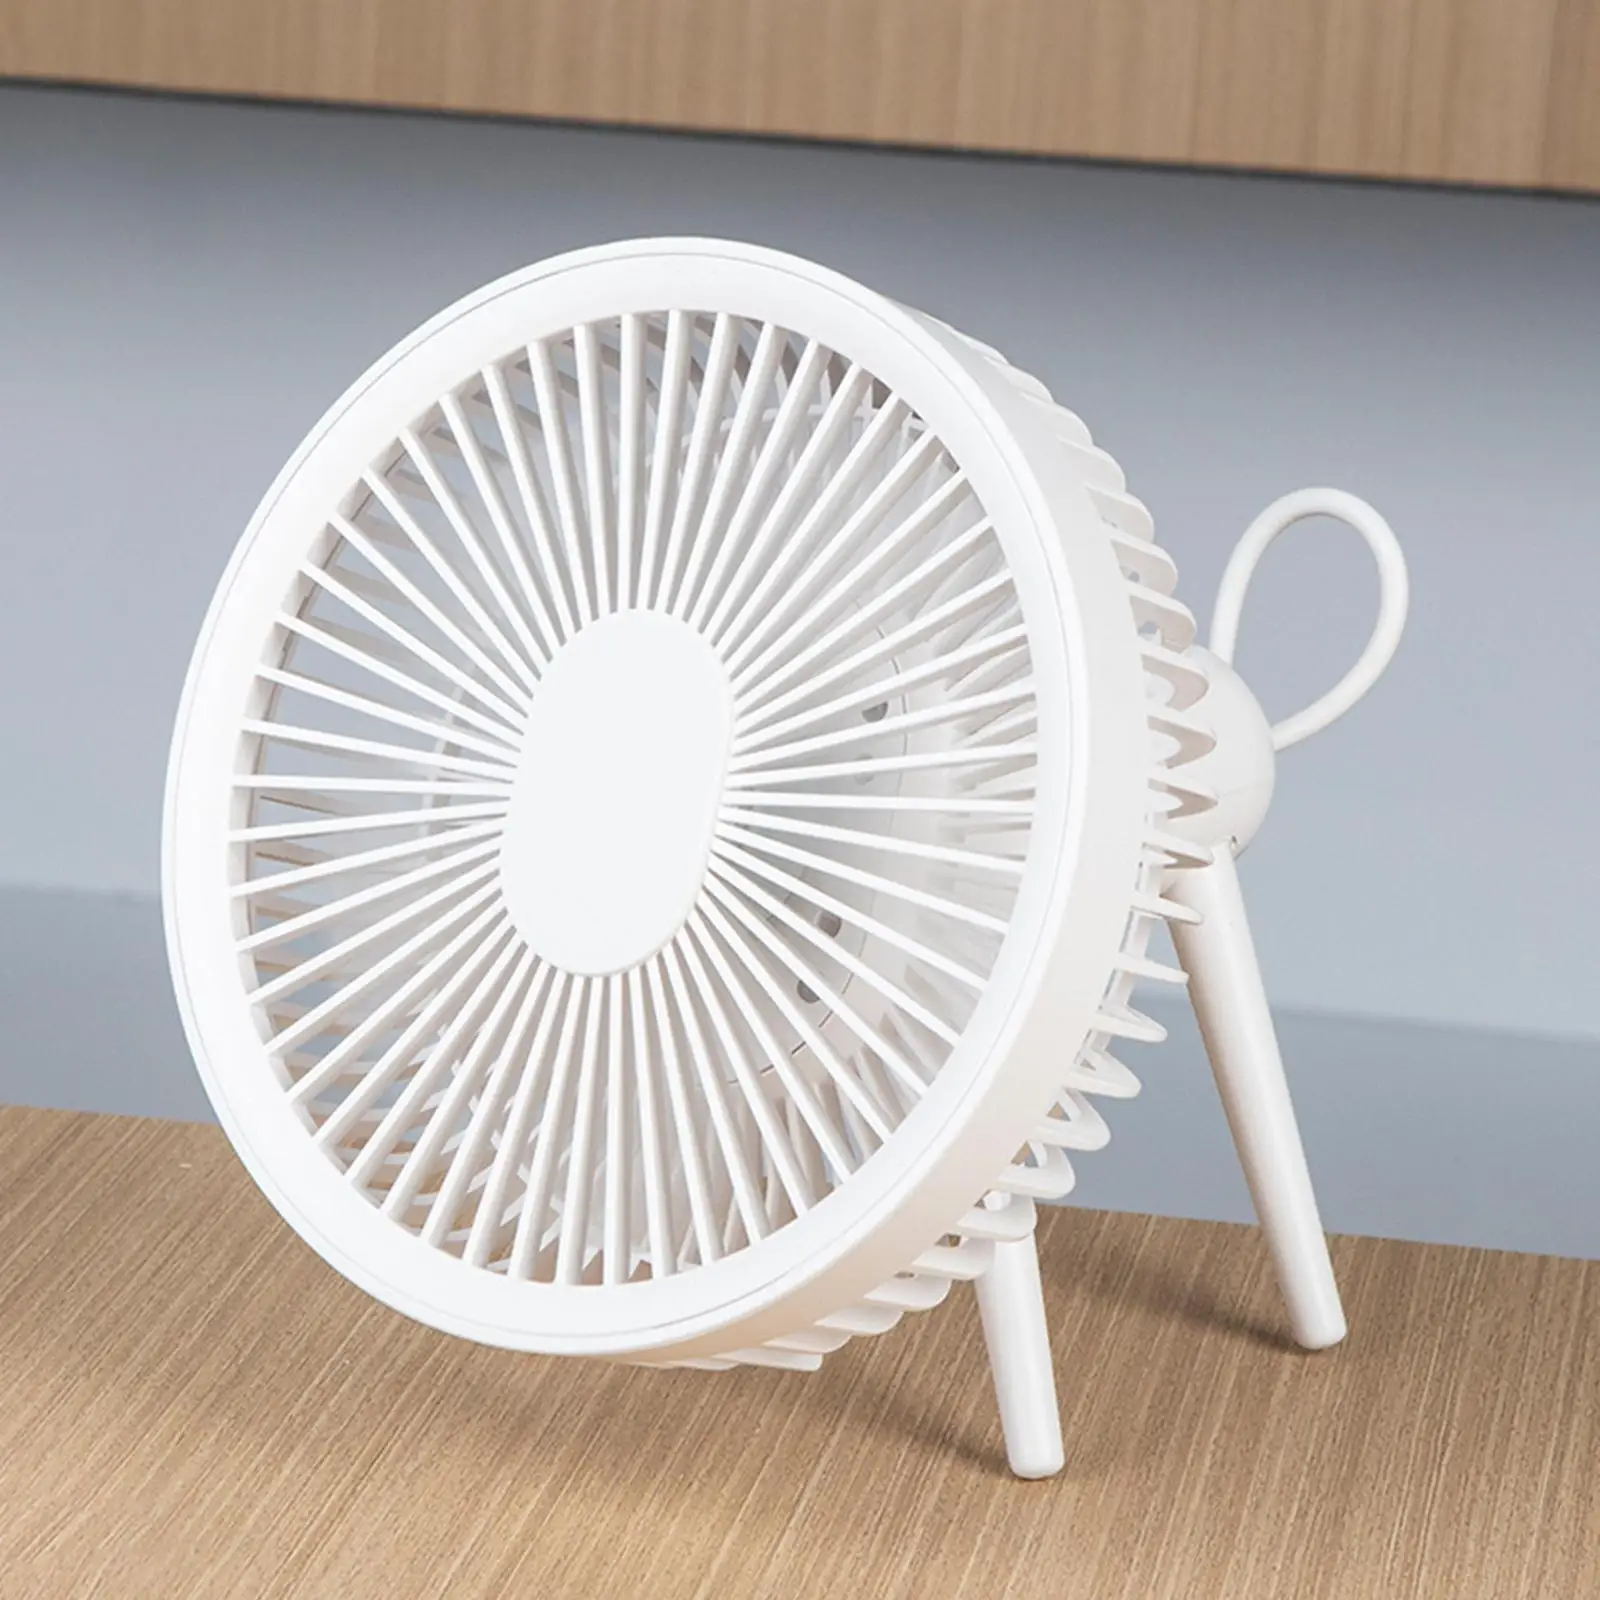 USB Desk Fans Air Cool Fan 4 Speeds Personal Table Cooling Fan for Backpacking Car